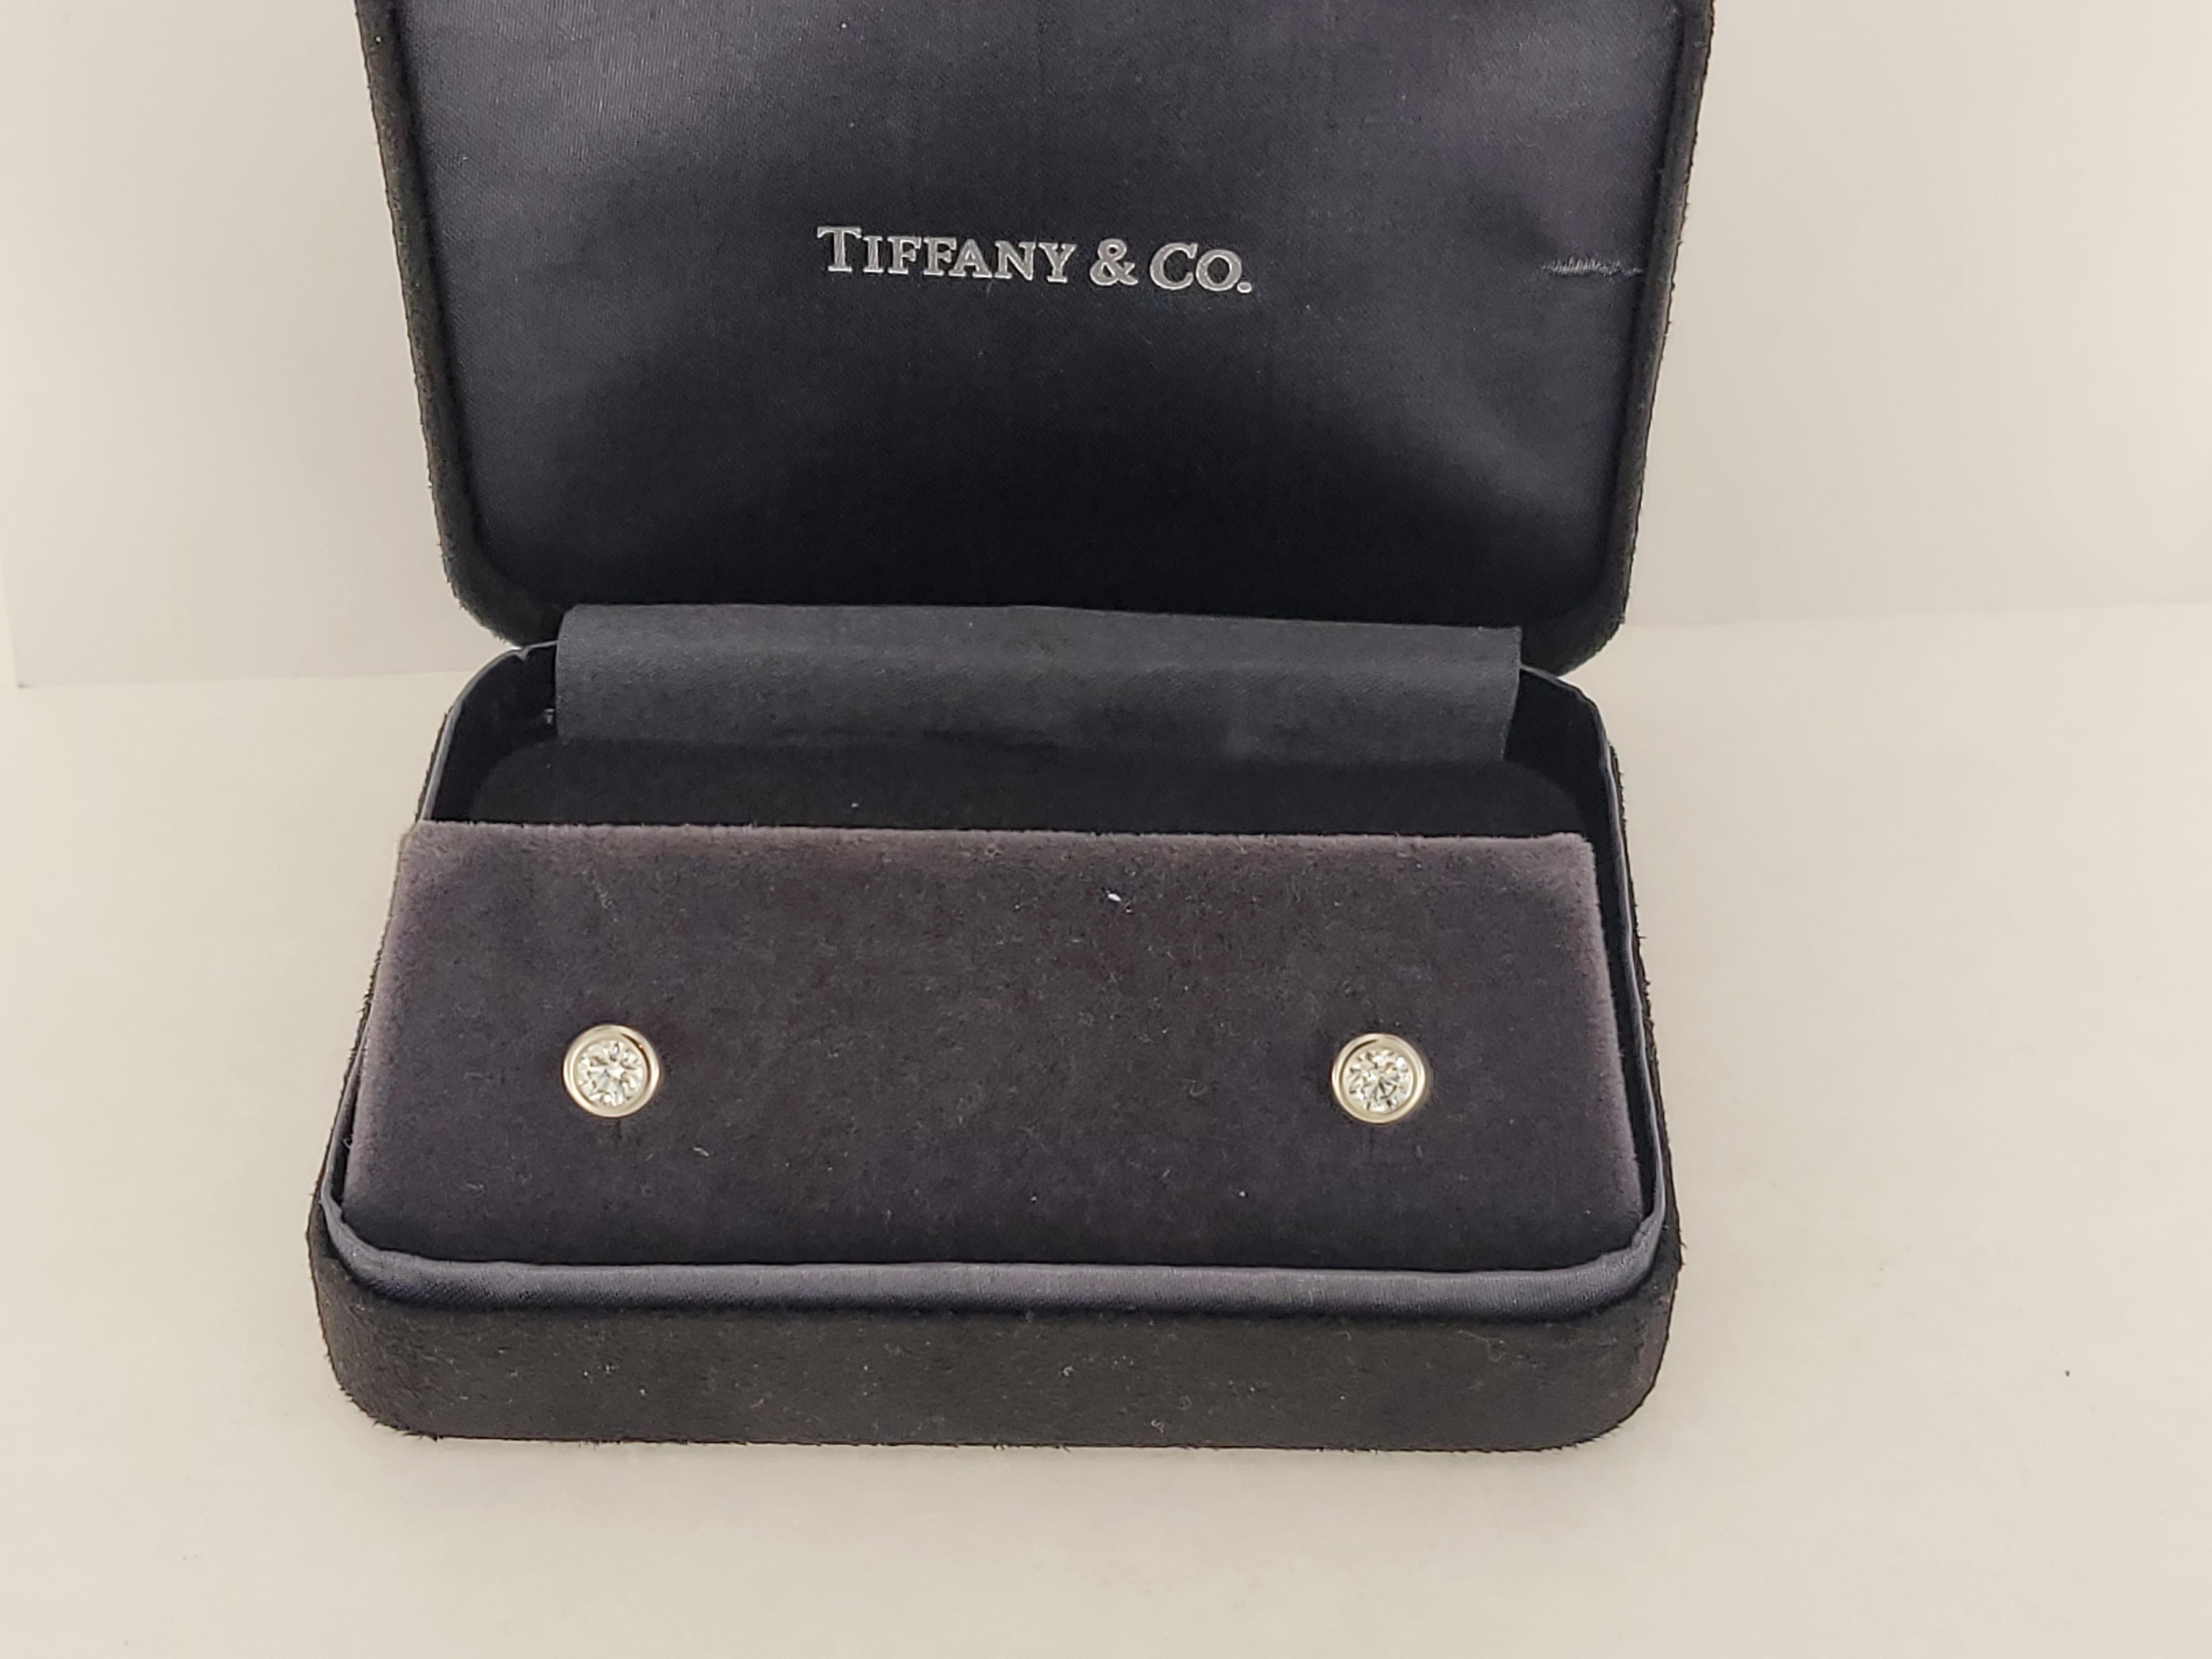 Elsa Peretti Tiffany & co Diamond Earring in platinum In Excellent Condition For Sale In New York, NY